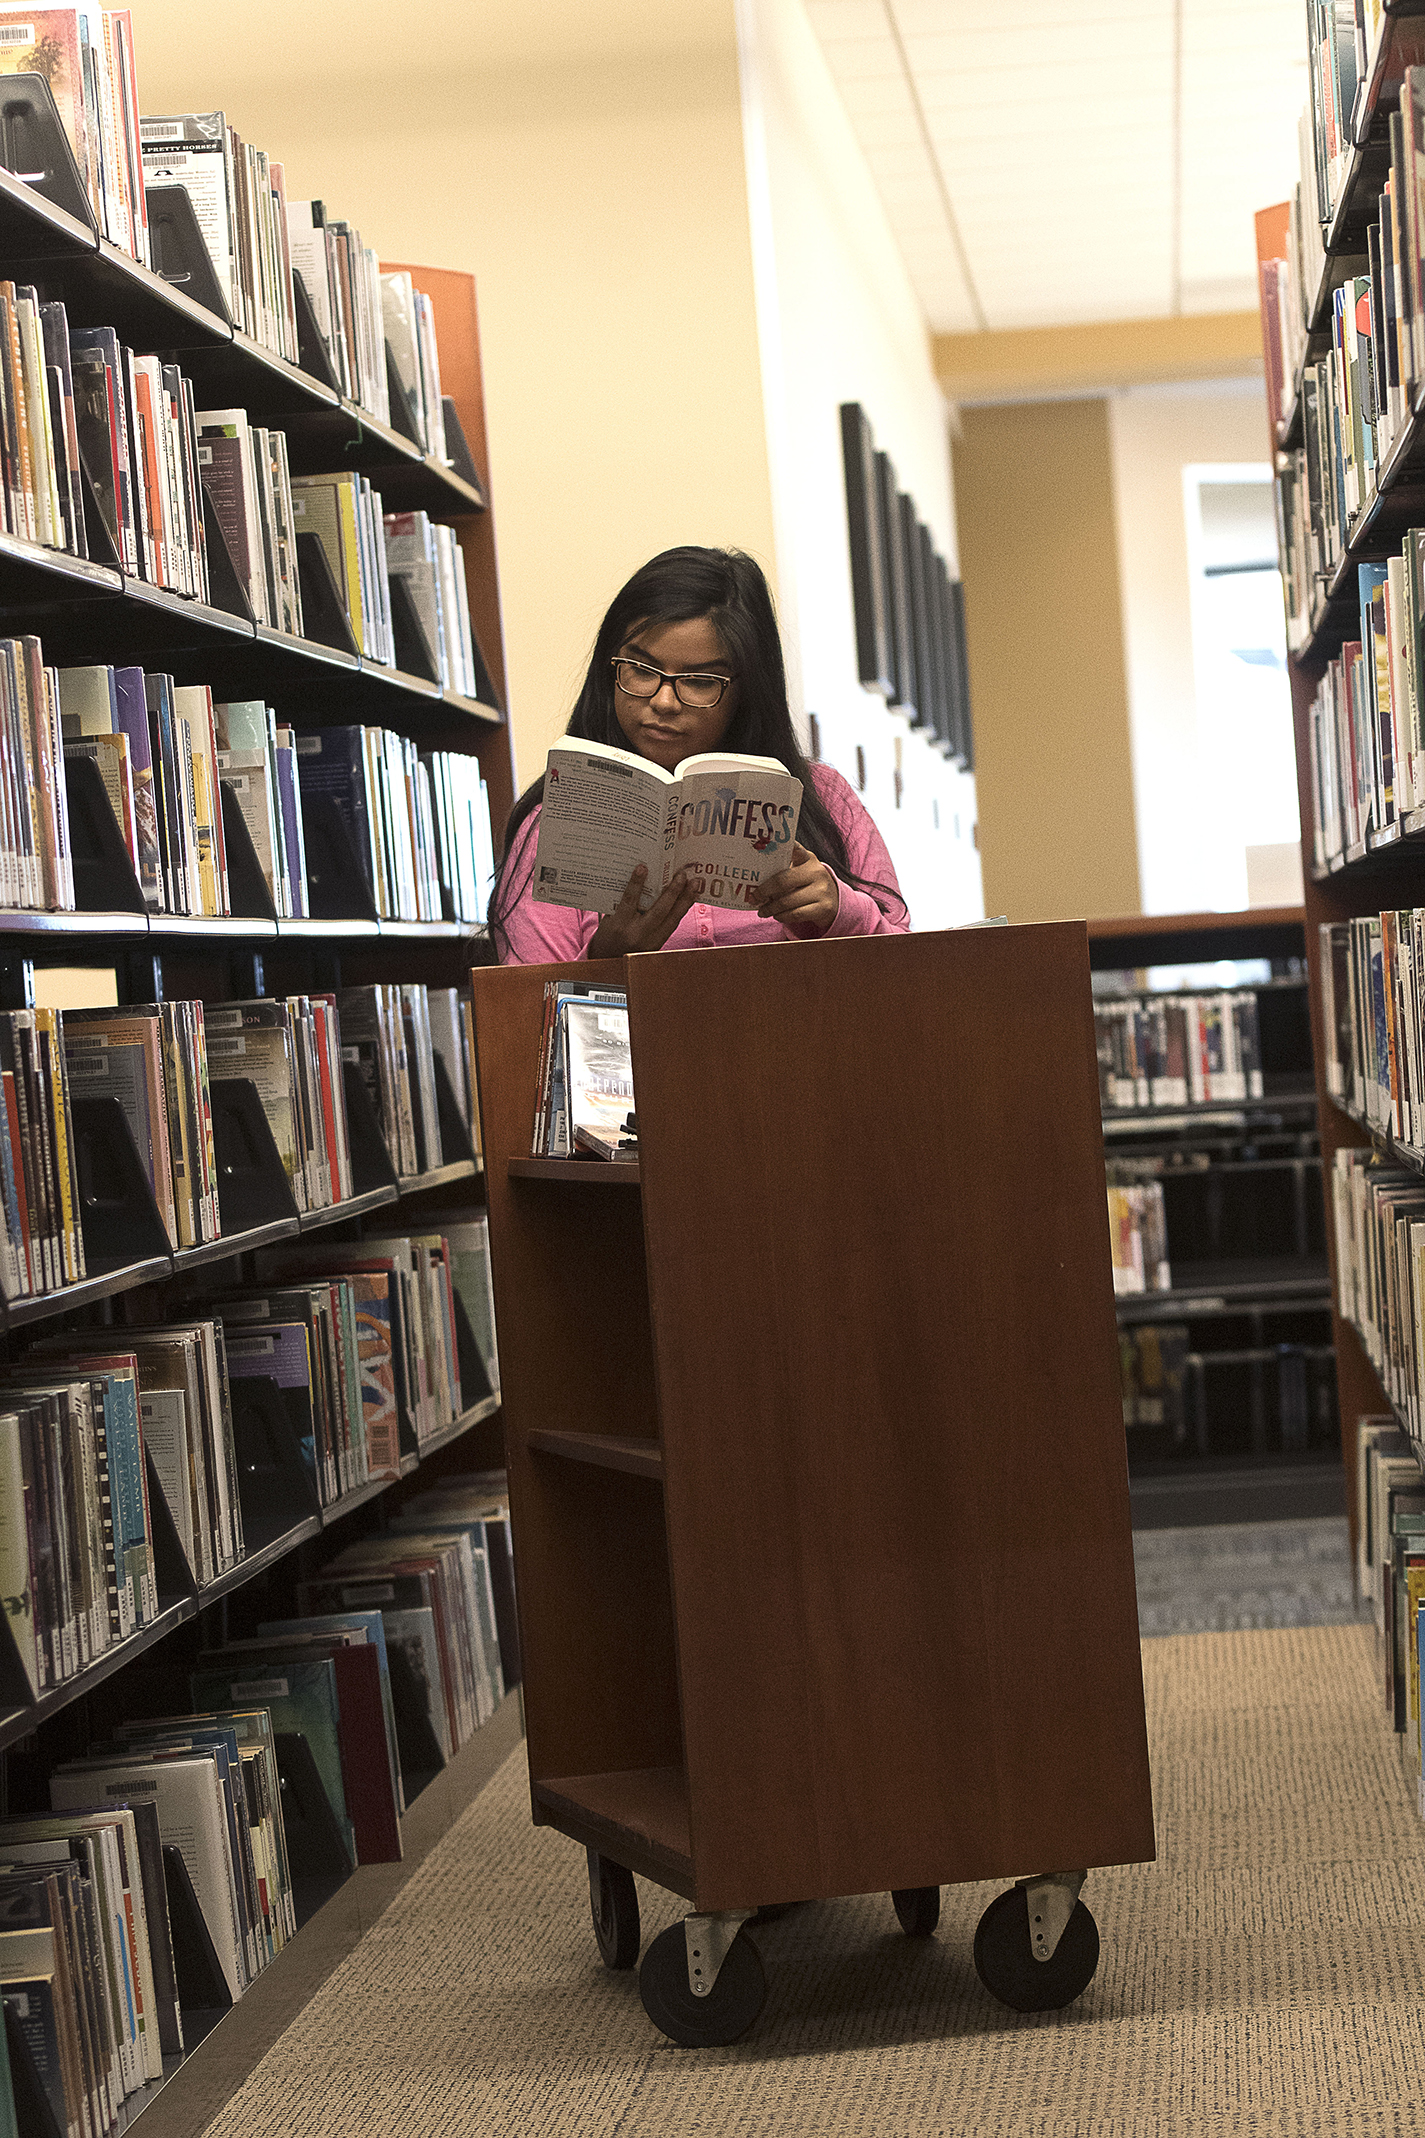 TR work-study student Tatiana Flores skims a book during her library shift.